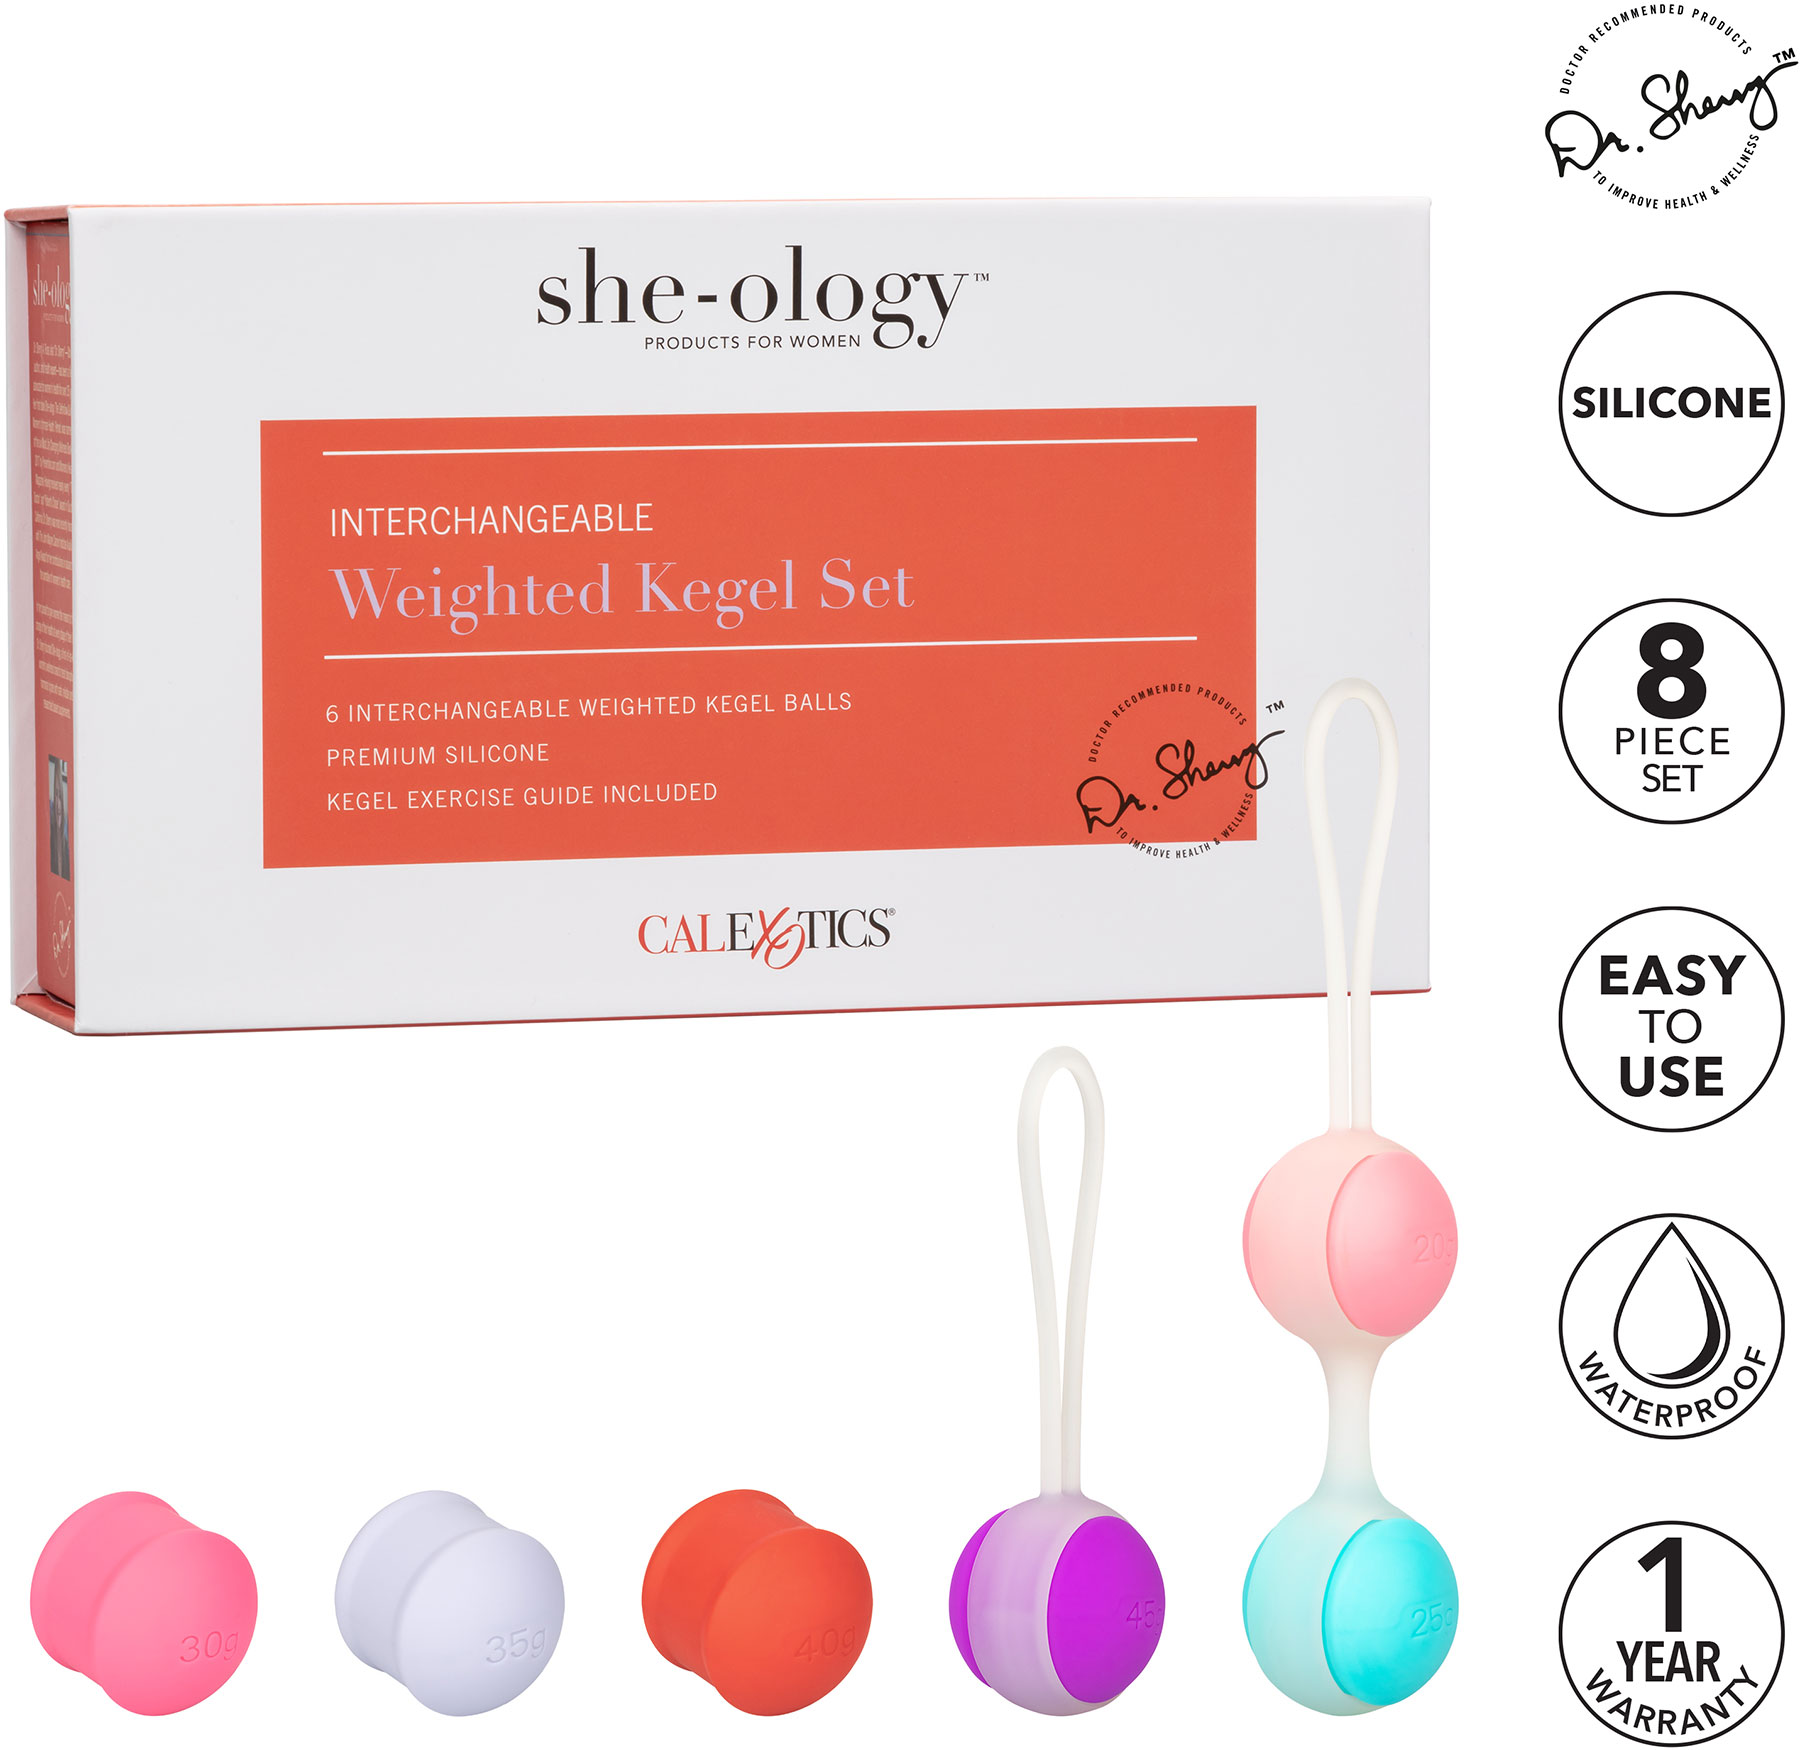 She-ology™ Interchangeable Weighted Silicone Kegel Set With Package